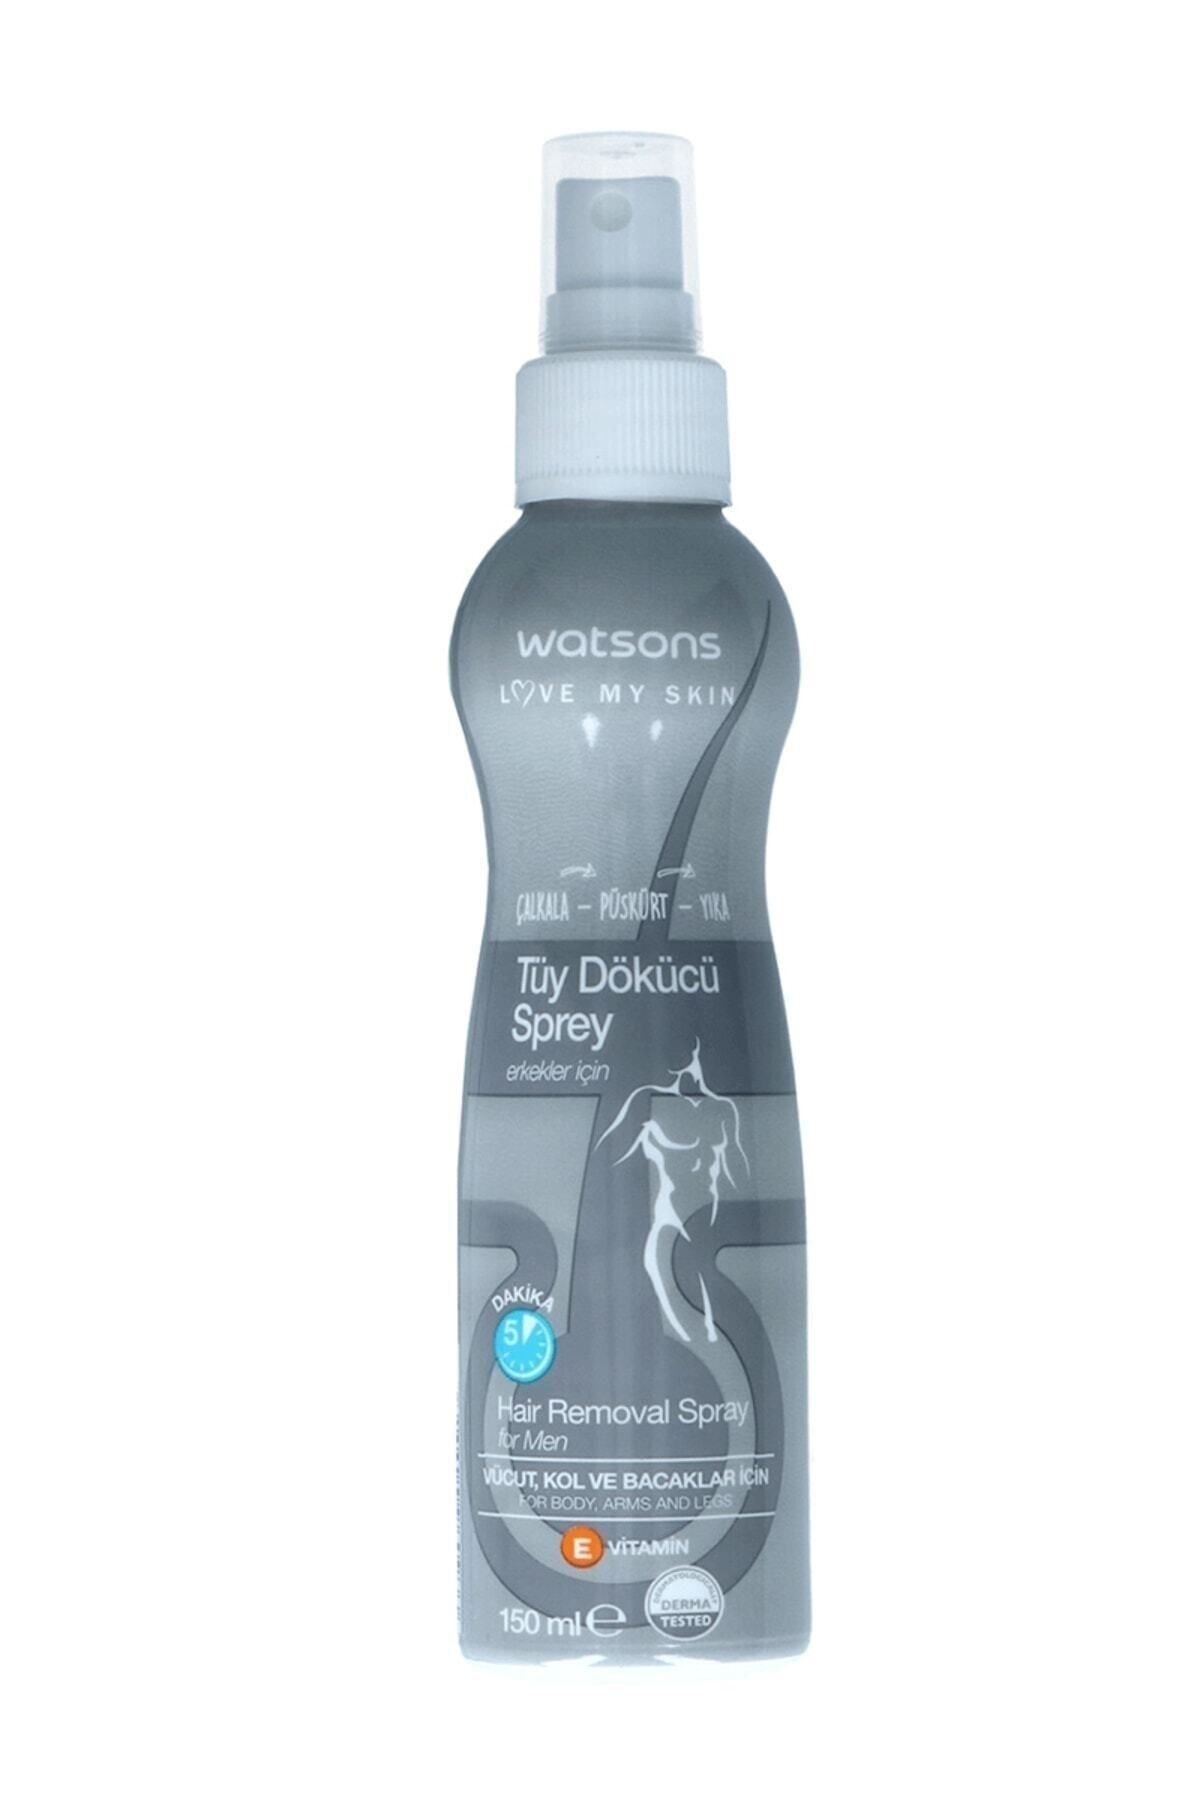 Watsons Special Hair Removal Spray for Men 150 Ml.